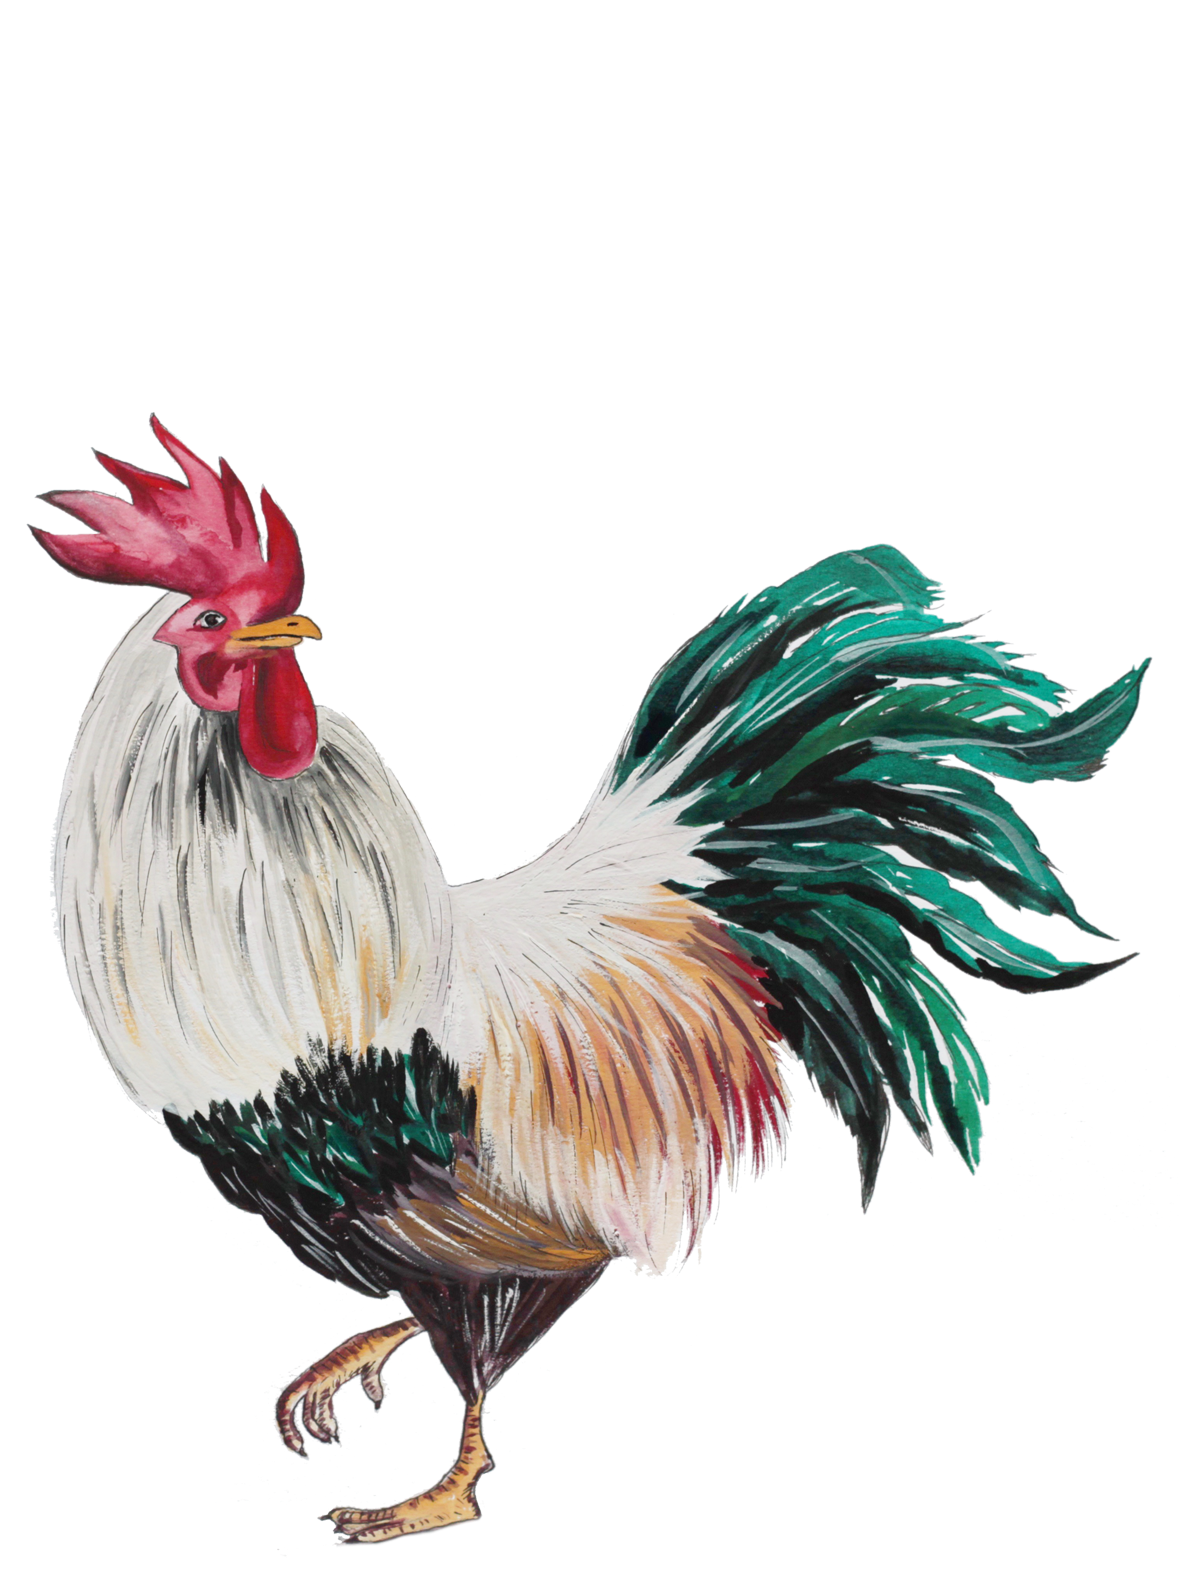 Hand drawn illustration of a Rooster